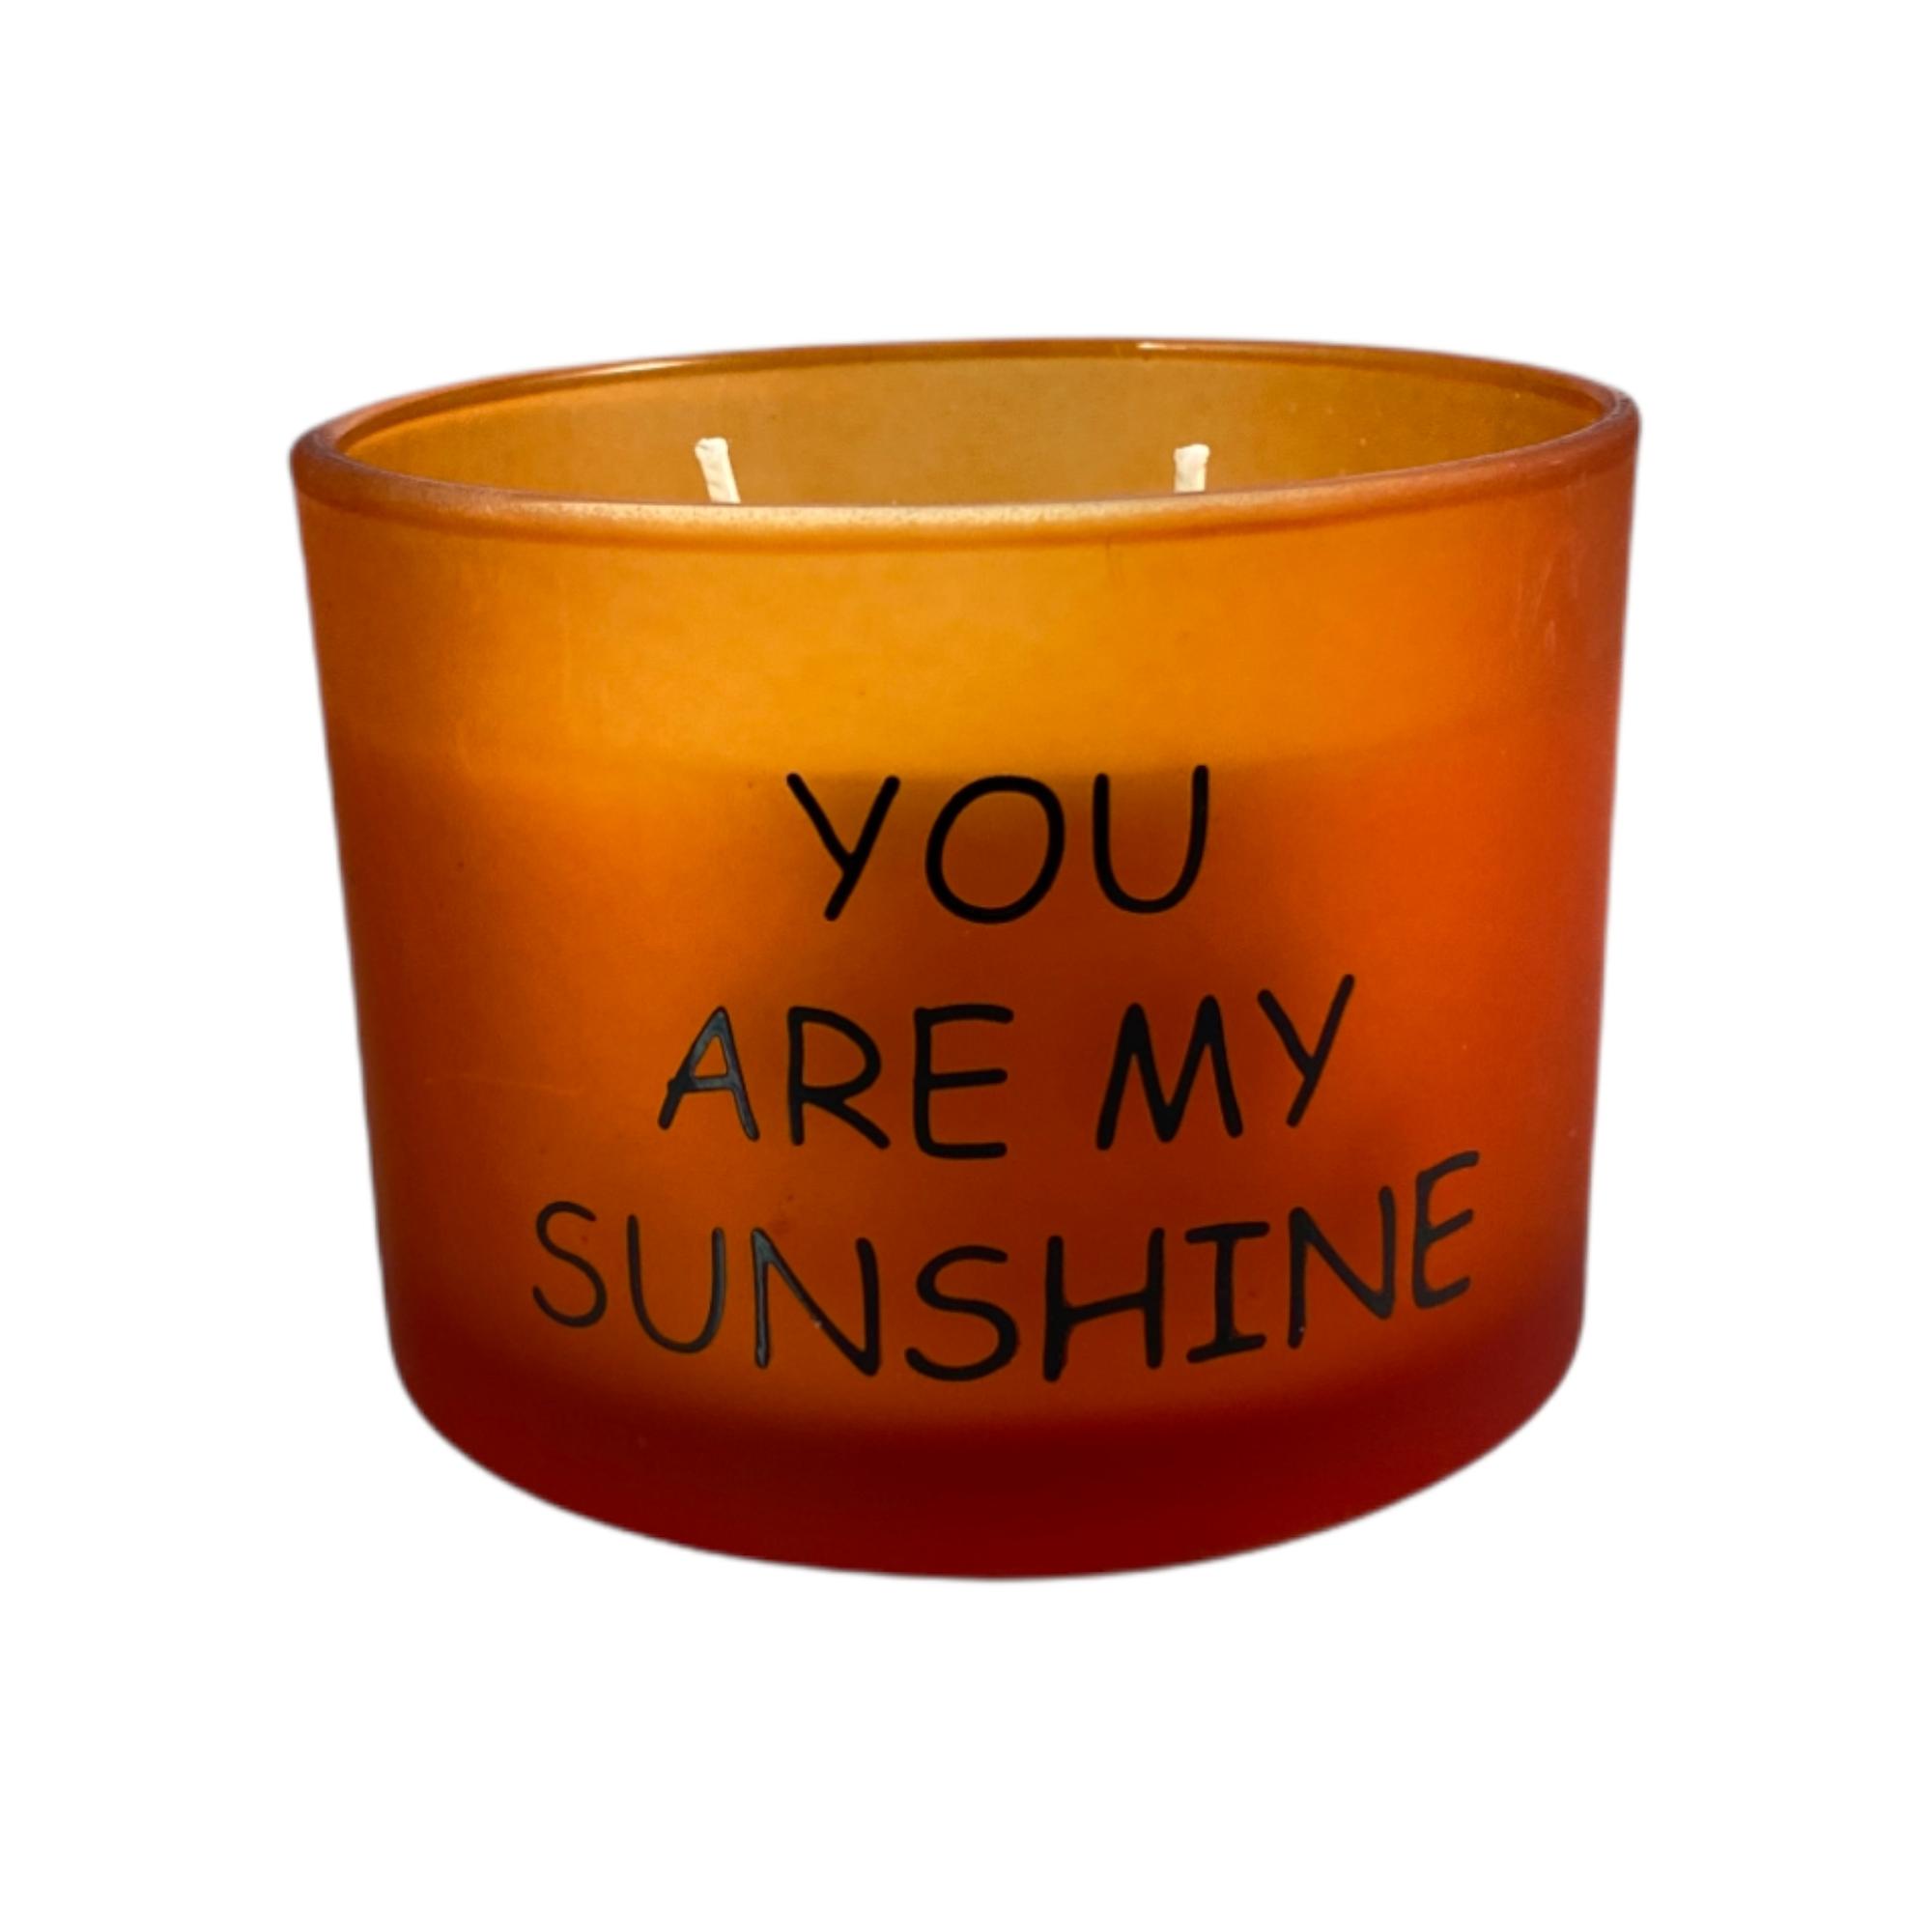 SCENTED CANDLE 11X11X8CM - 415-651905